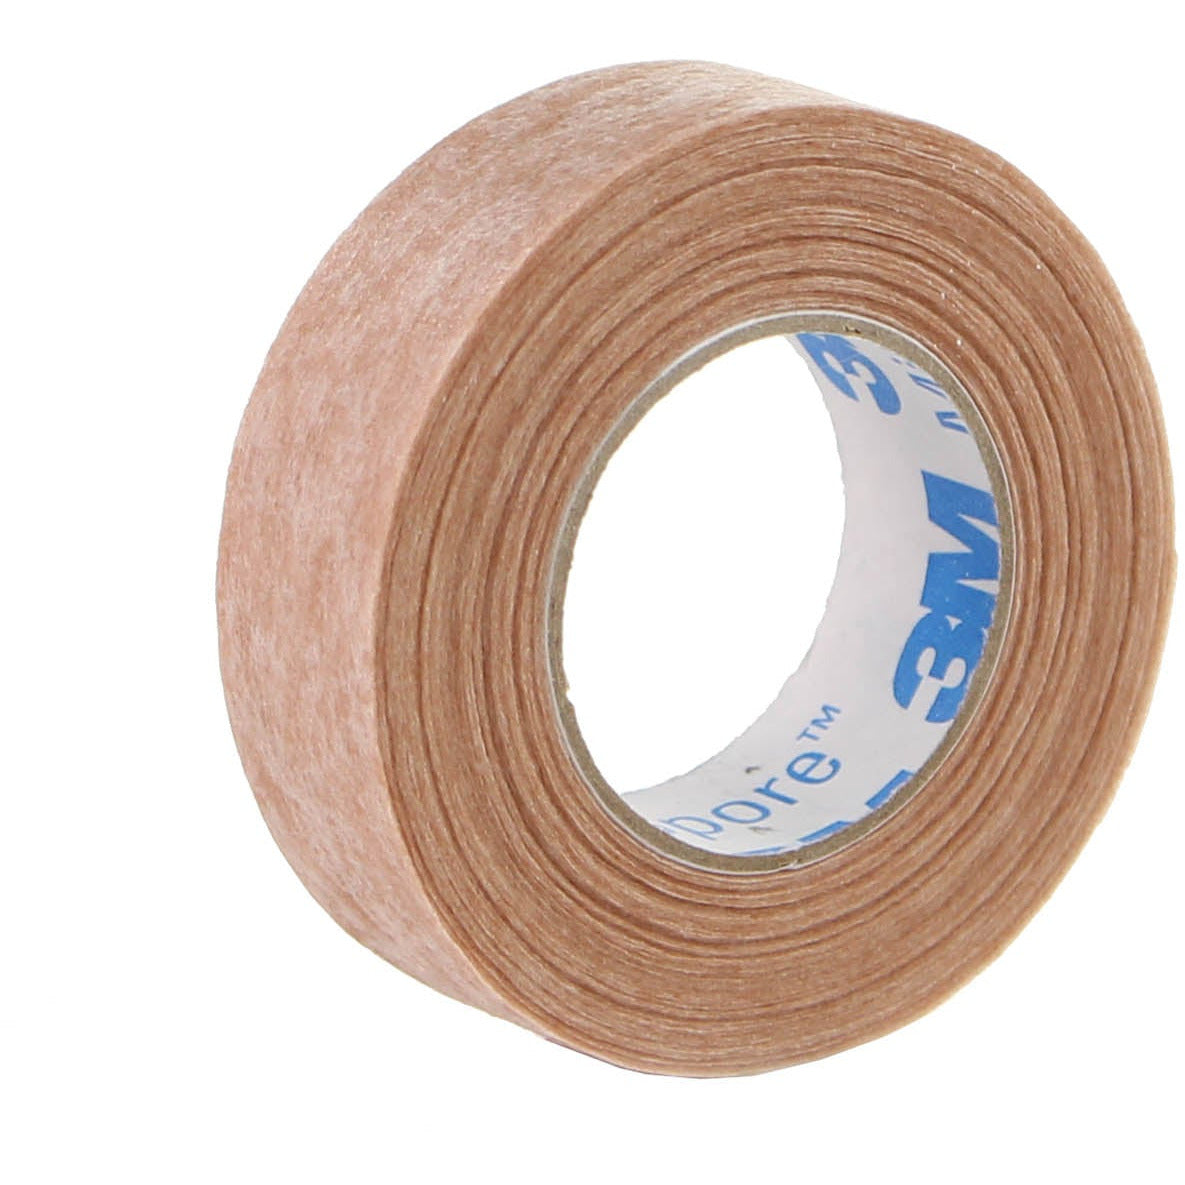 3M Micropore Skin Tone Surgical Tape - 1.25cm x 9.14m – Medisave UK